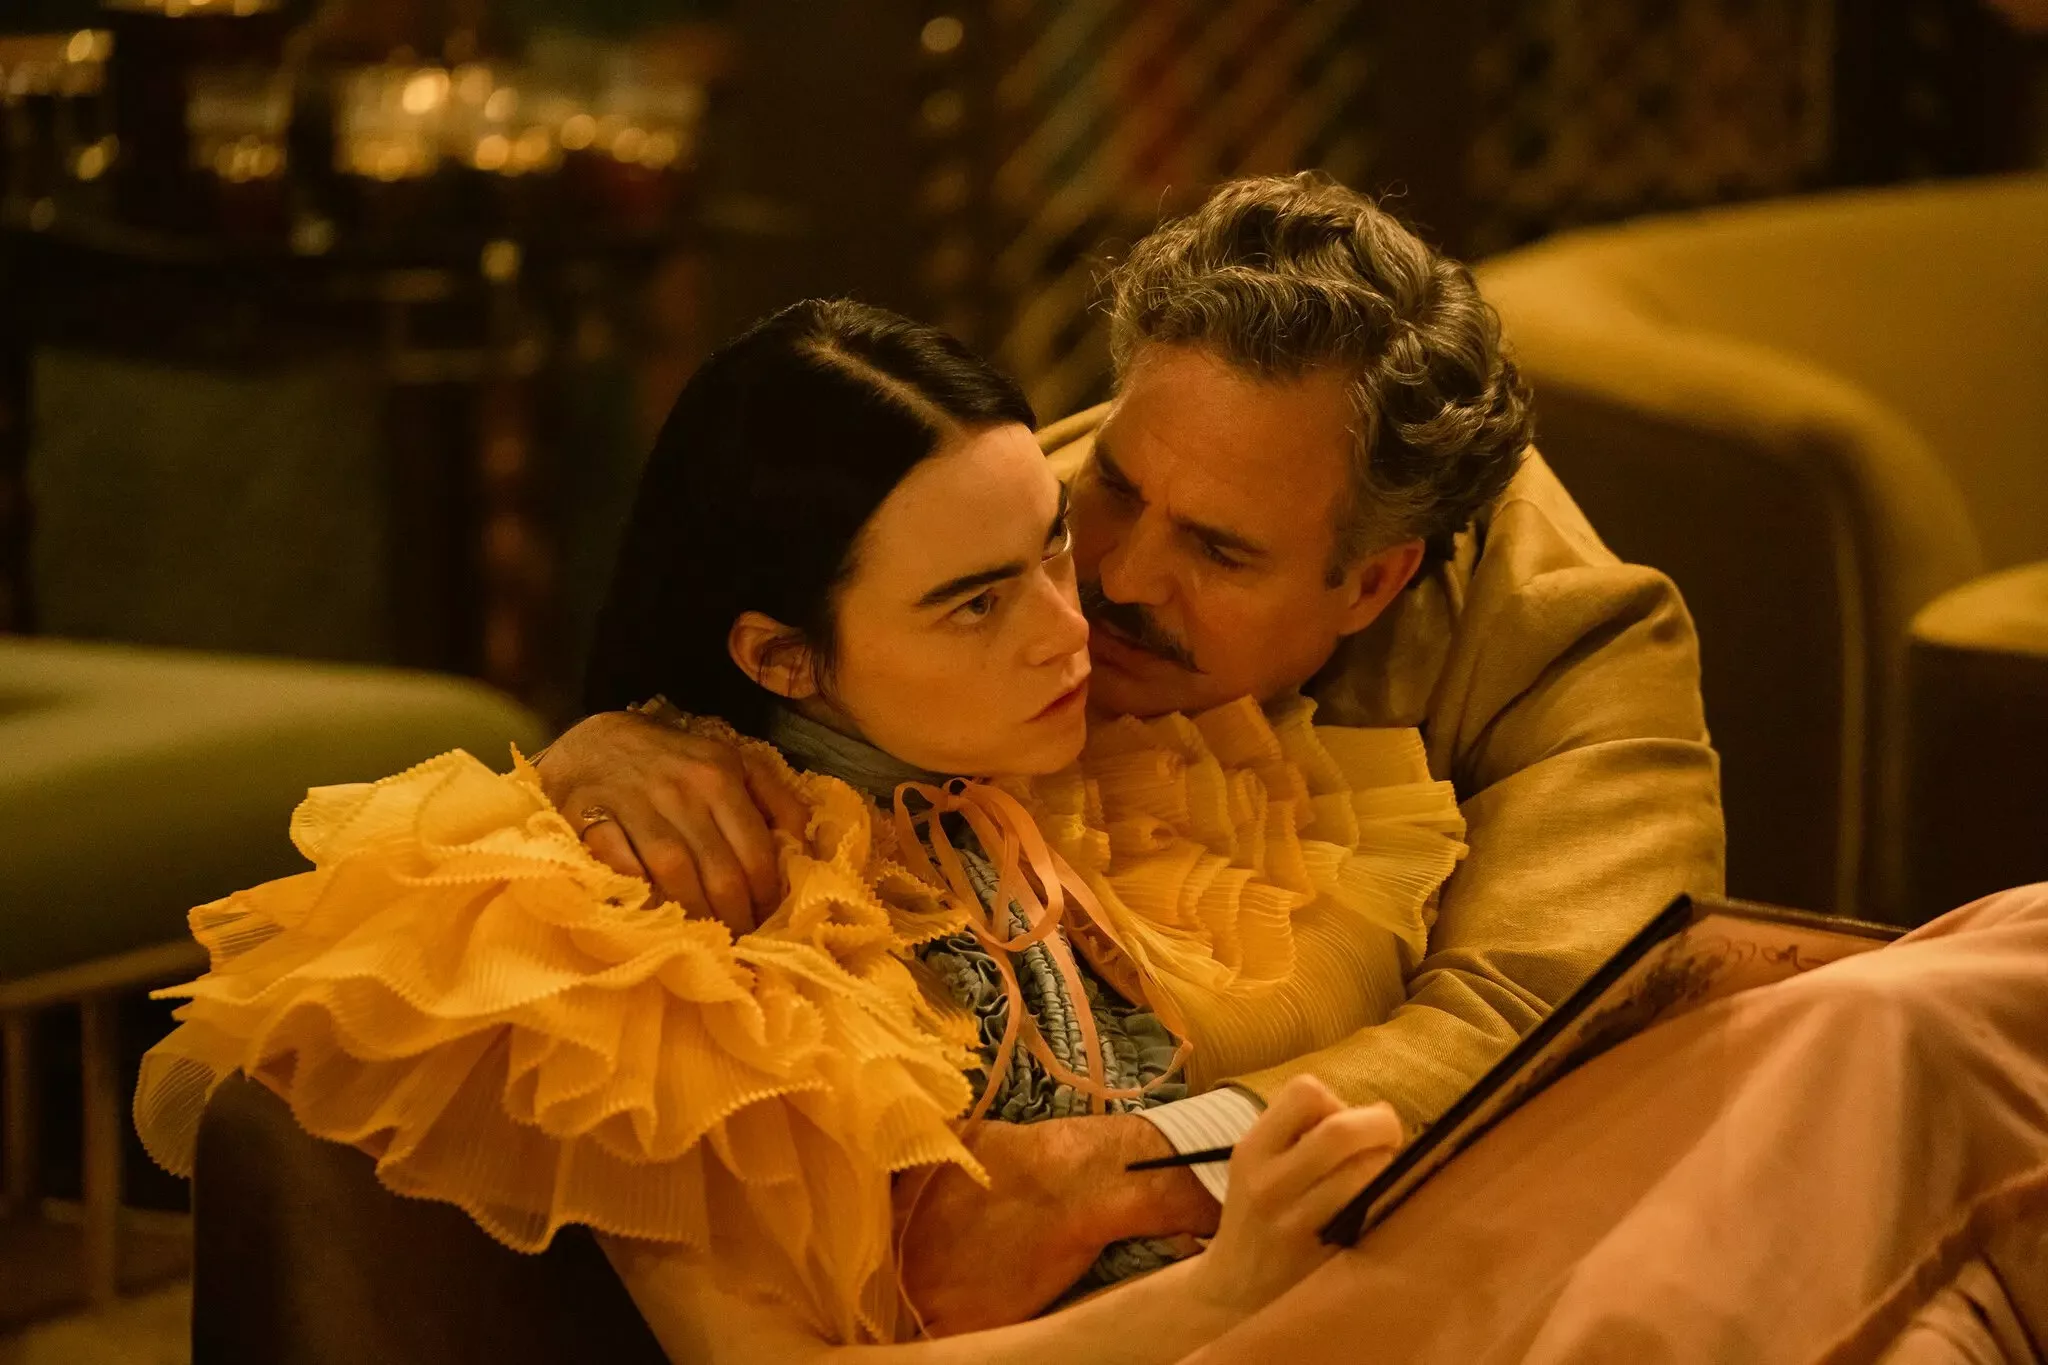 A young woman in an orange dress with a frilly collar is held close by a man with a mustache.